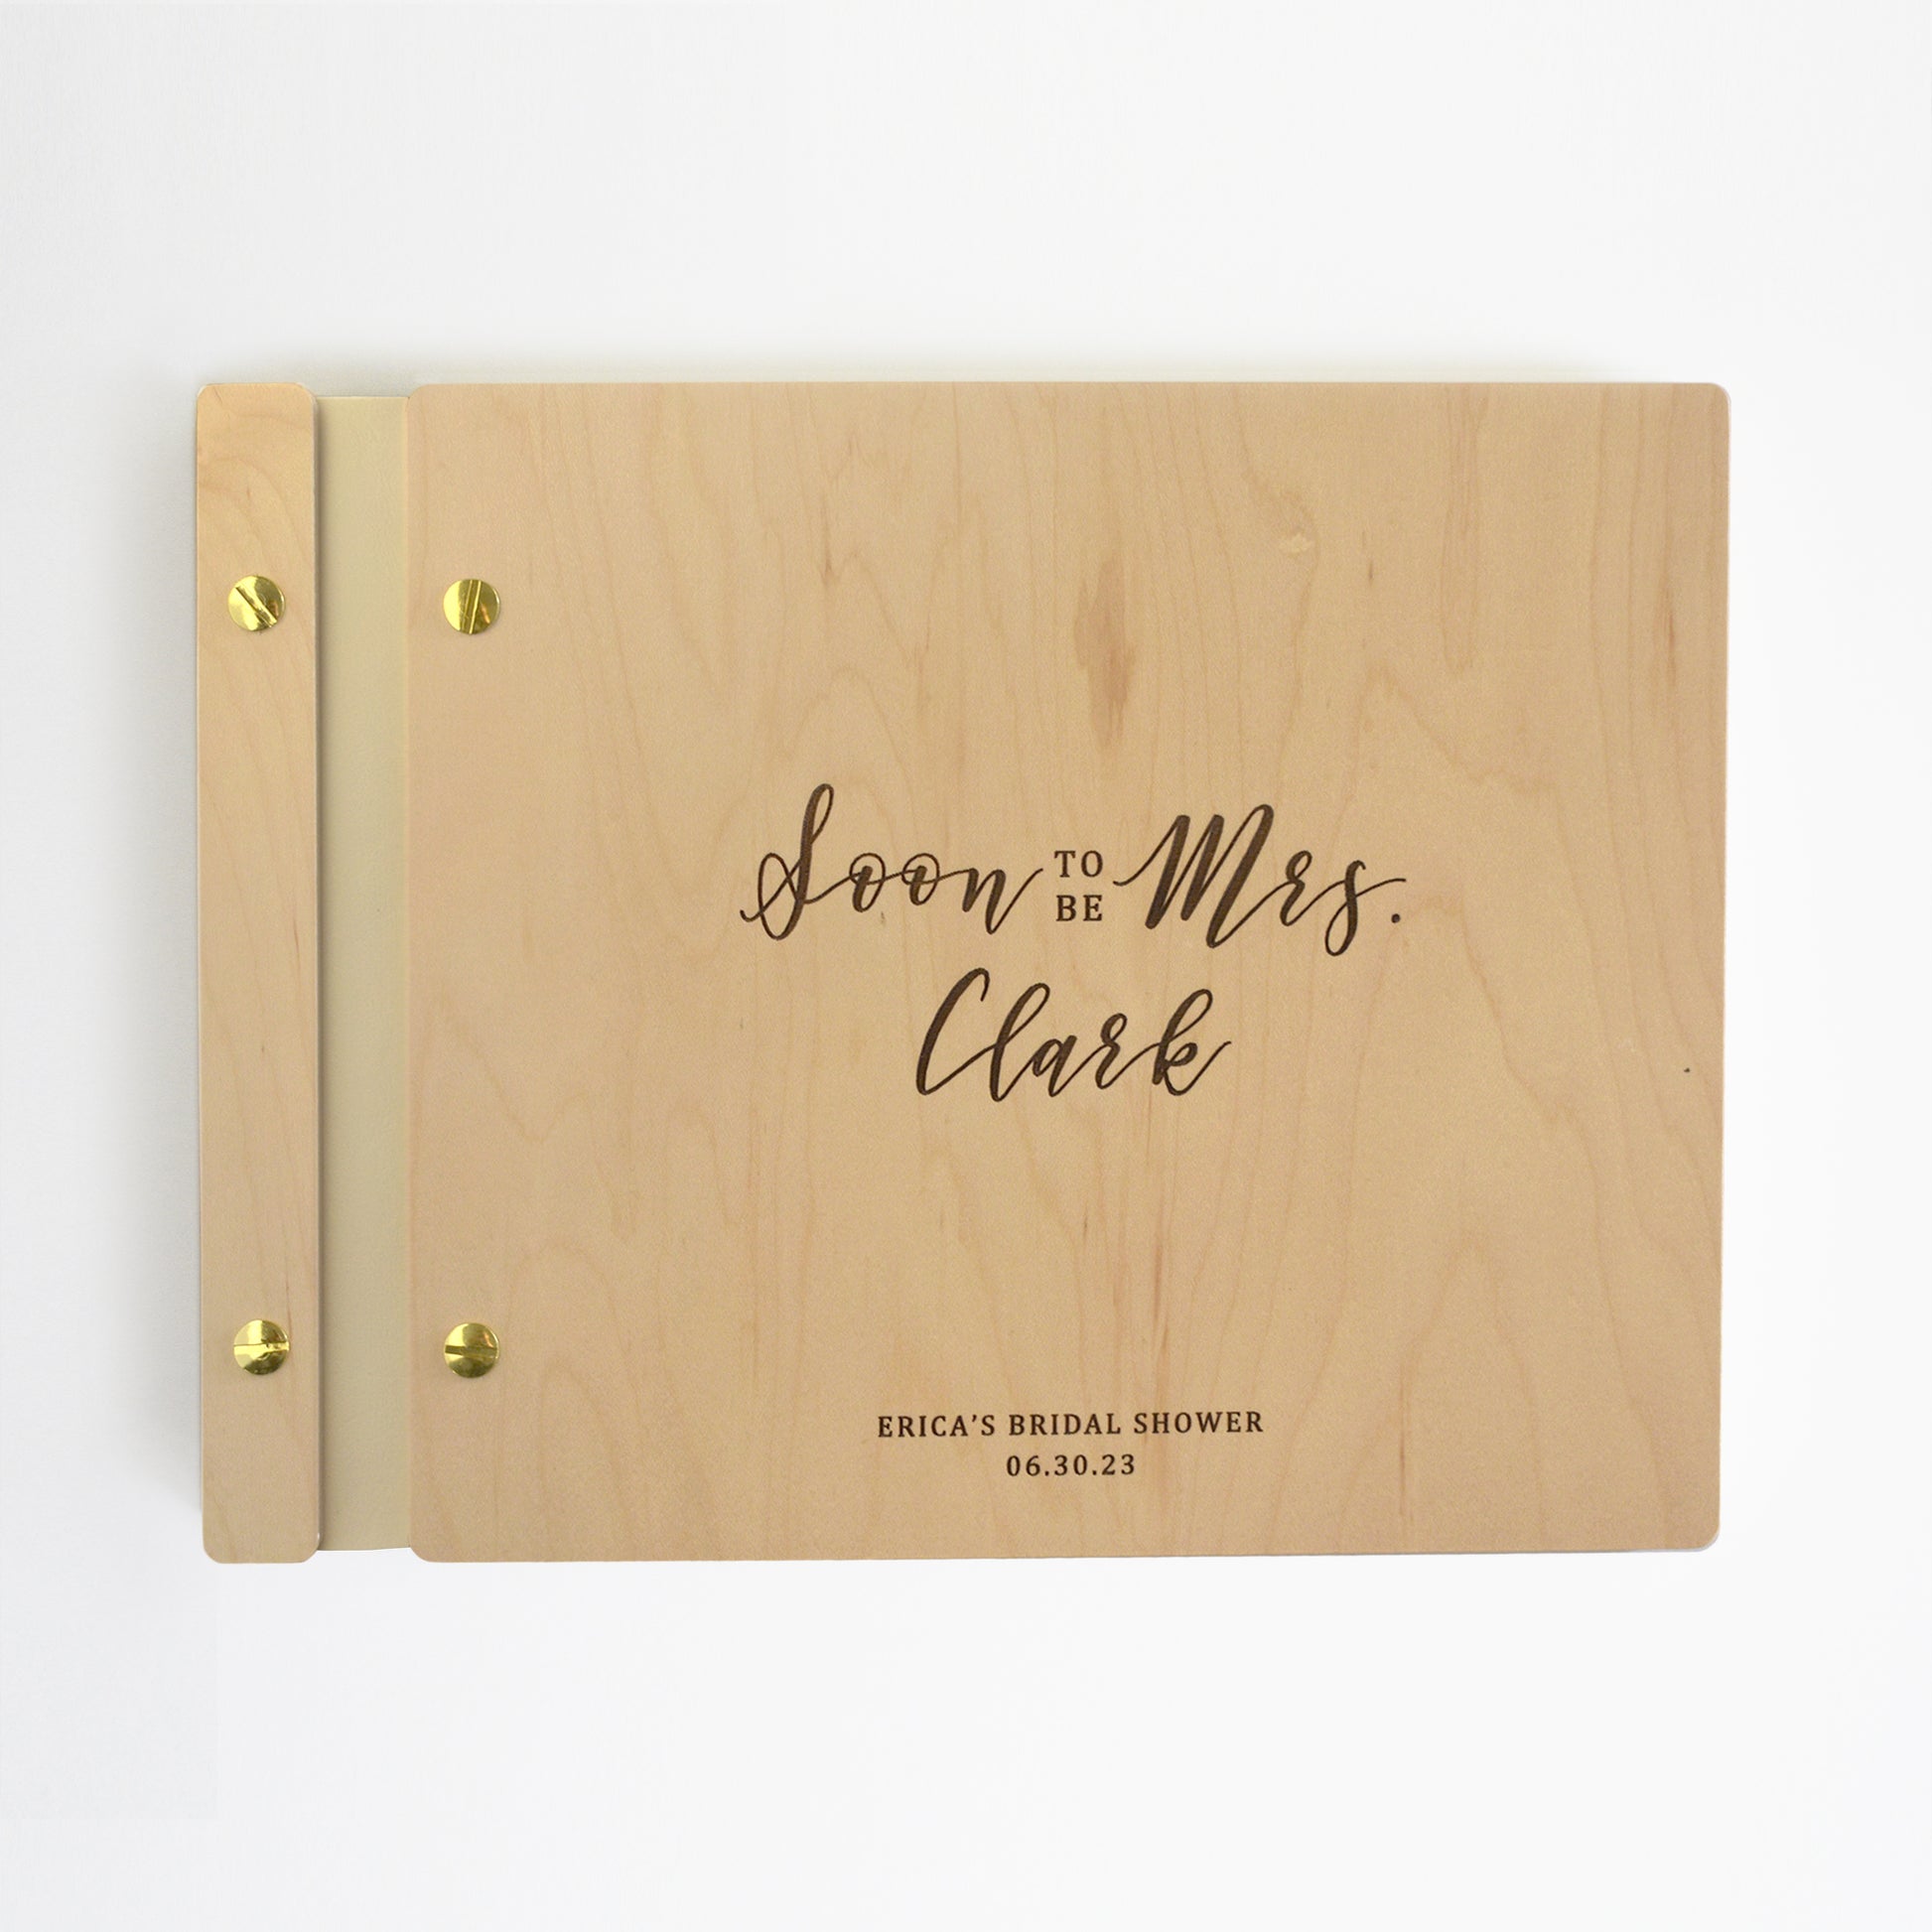 An 8.5x11" wedding guest book lies on a table. Made of cherry or maple wood, vegan leather binding, and aluminum hardware. The front cover includes an engraved design with personalization.